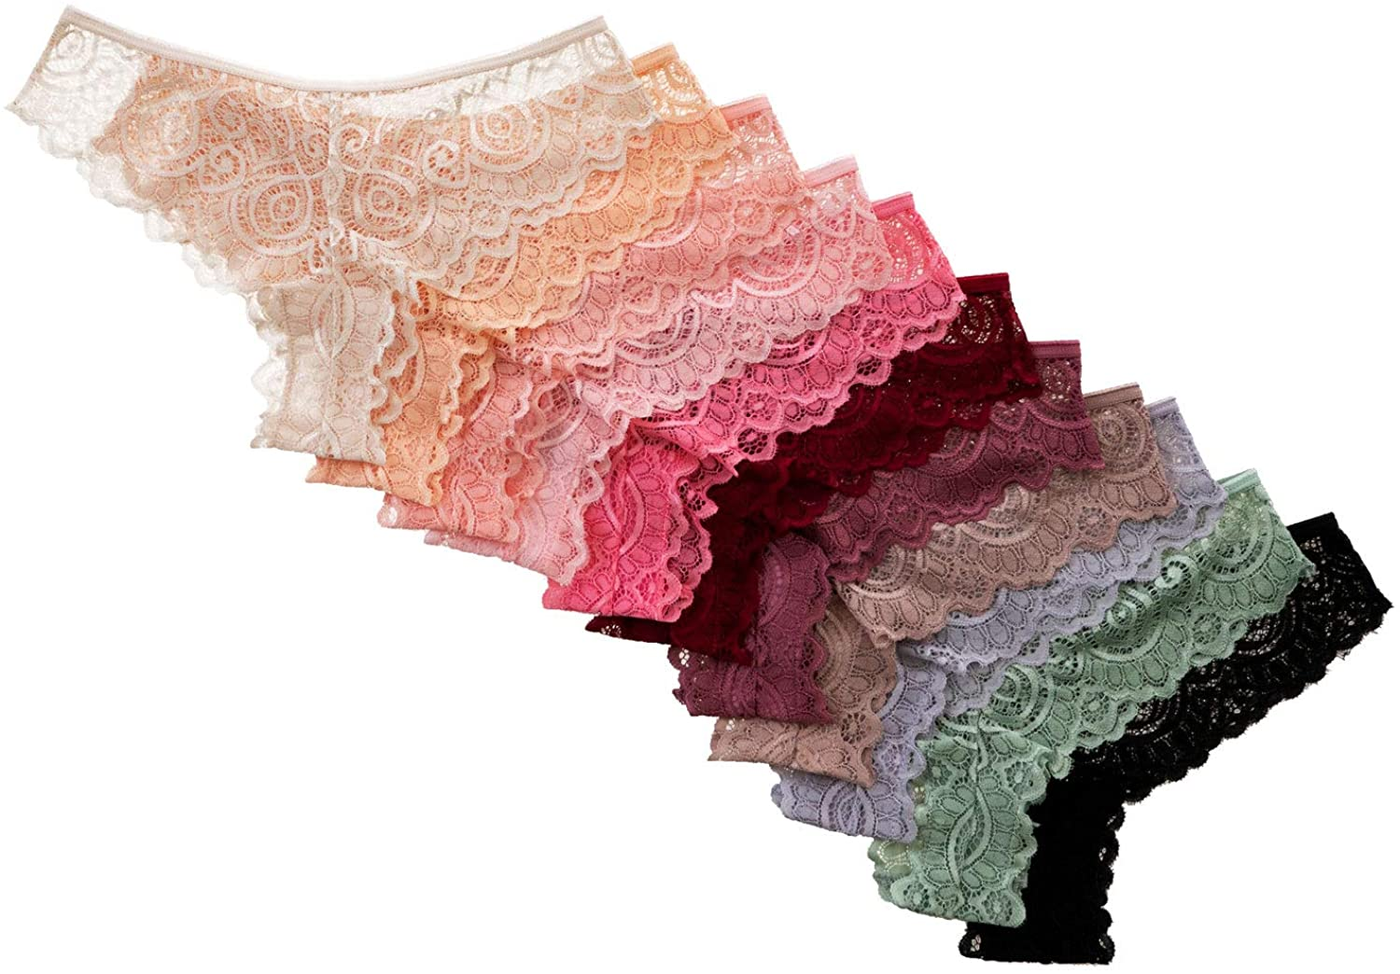 12 Pack Women's Lace Thongs - Assorted Colors